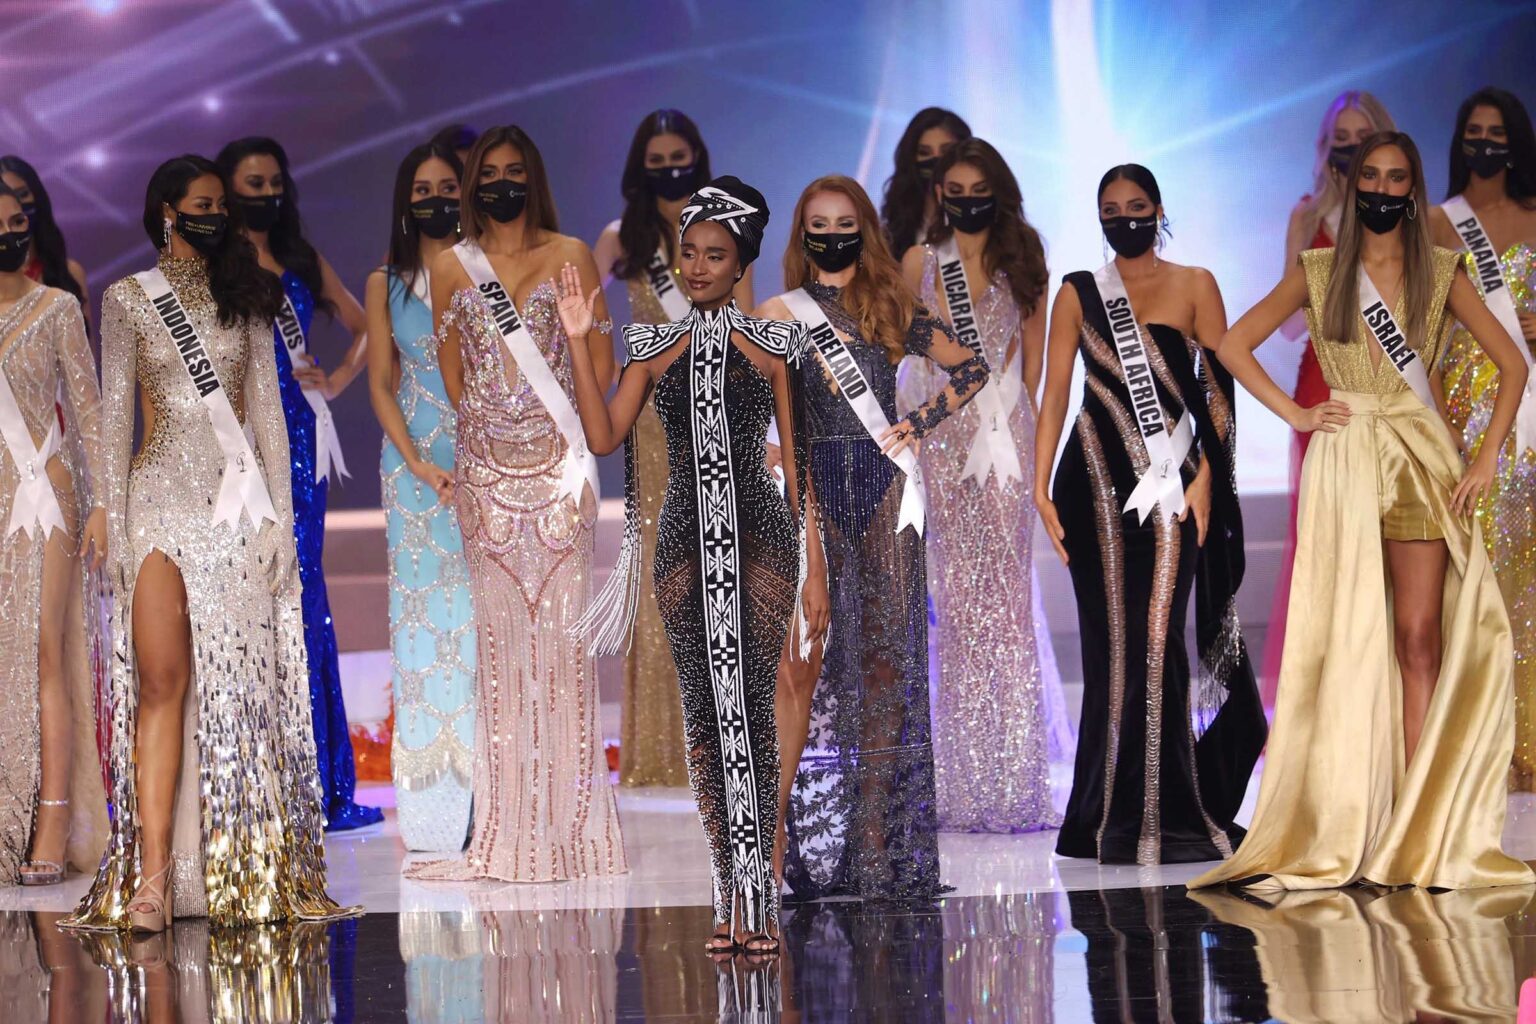 Miss Universe 2021 has come and gone, but the costume portion made impactful statements. See some of the politically-charged looks.